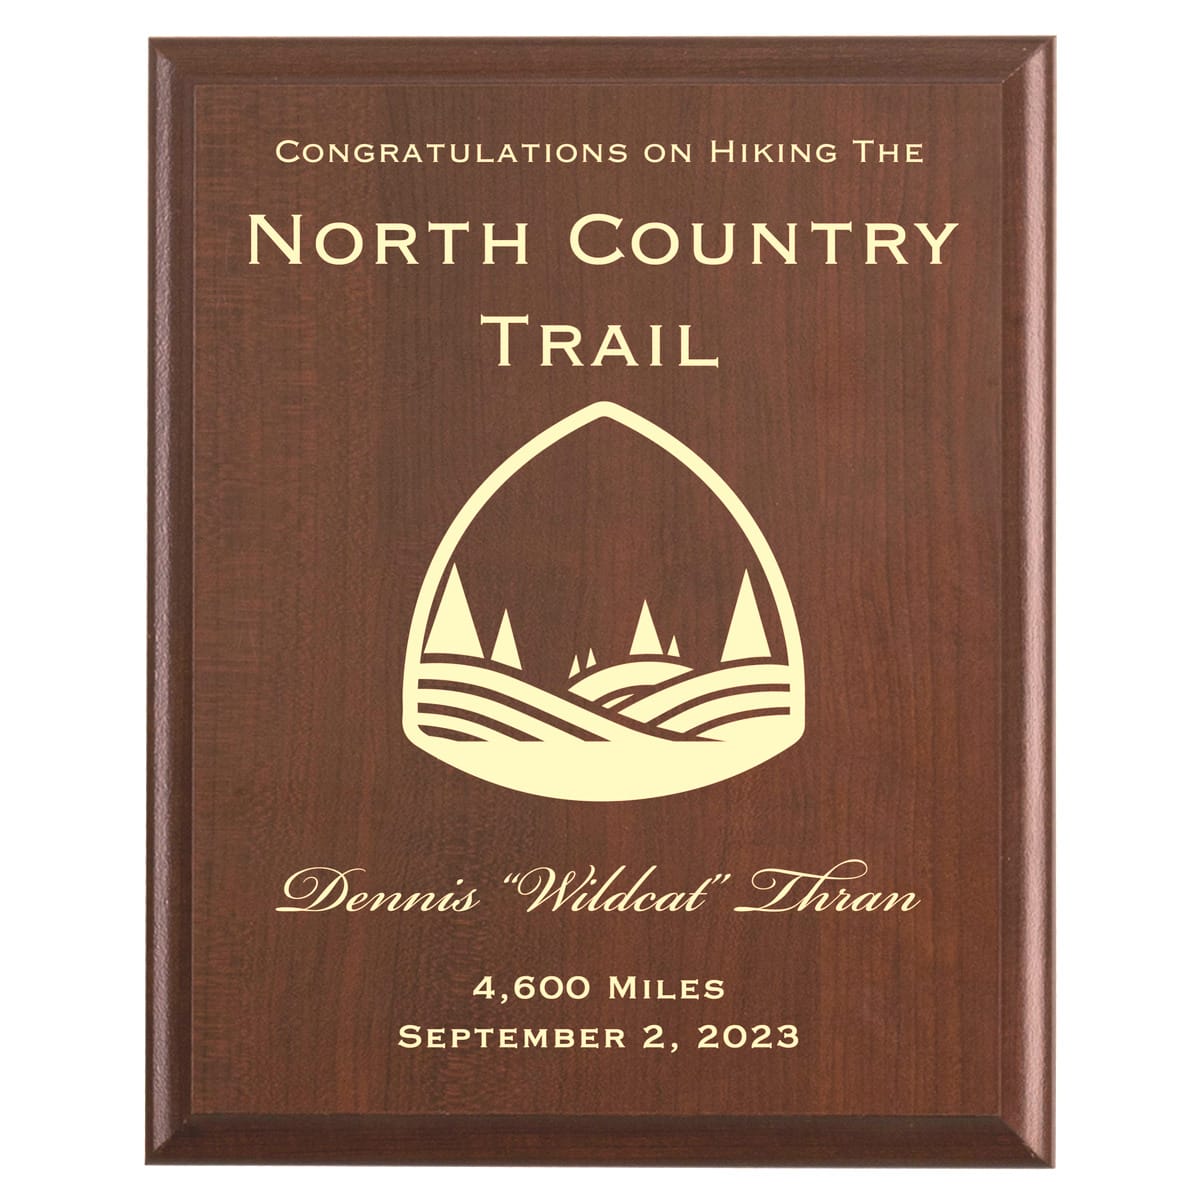 Plaque photo: North Country Trail Thru Hike Award design with free personalization. Wood style finish with customized text.